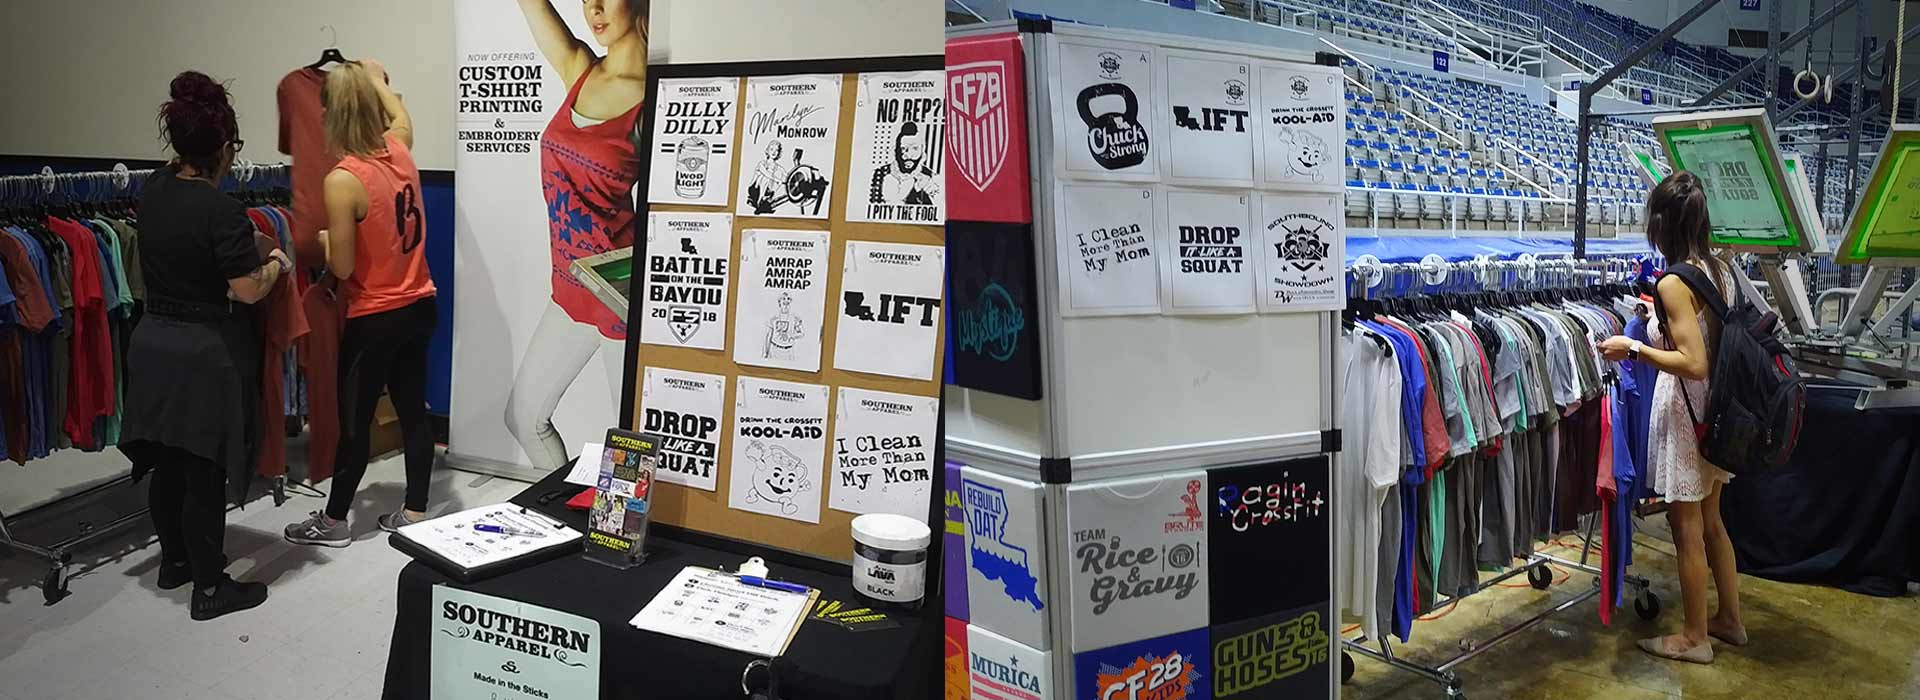 southern-apparel-wod-merch-live-event-printing